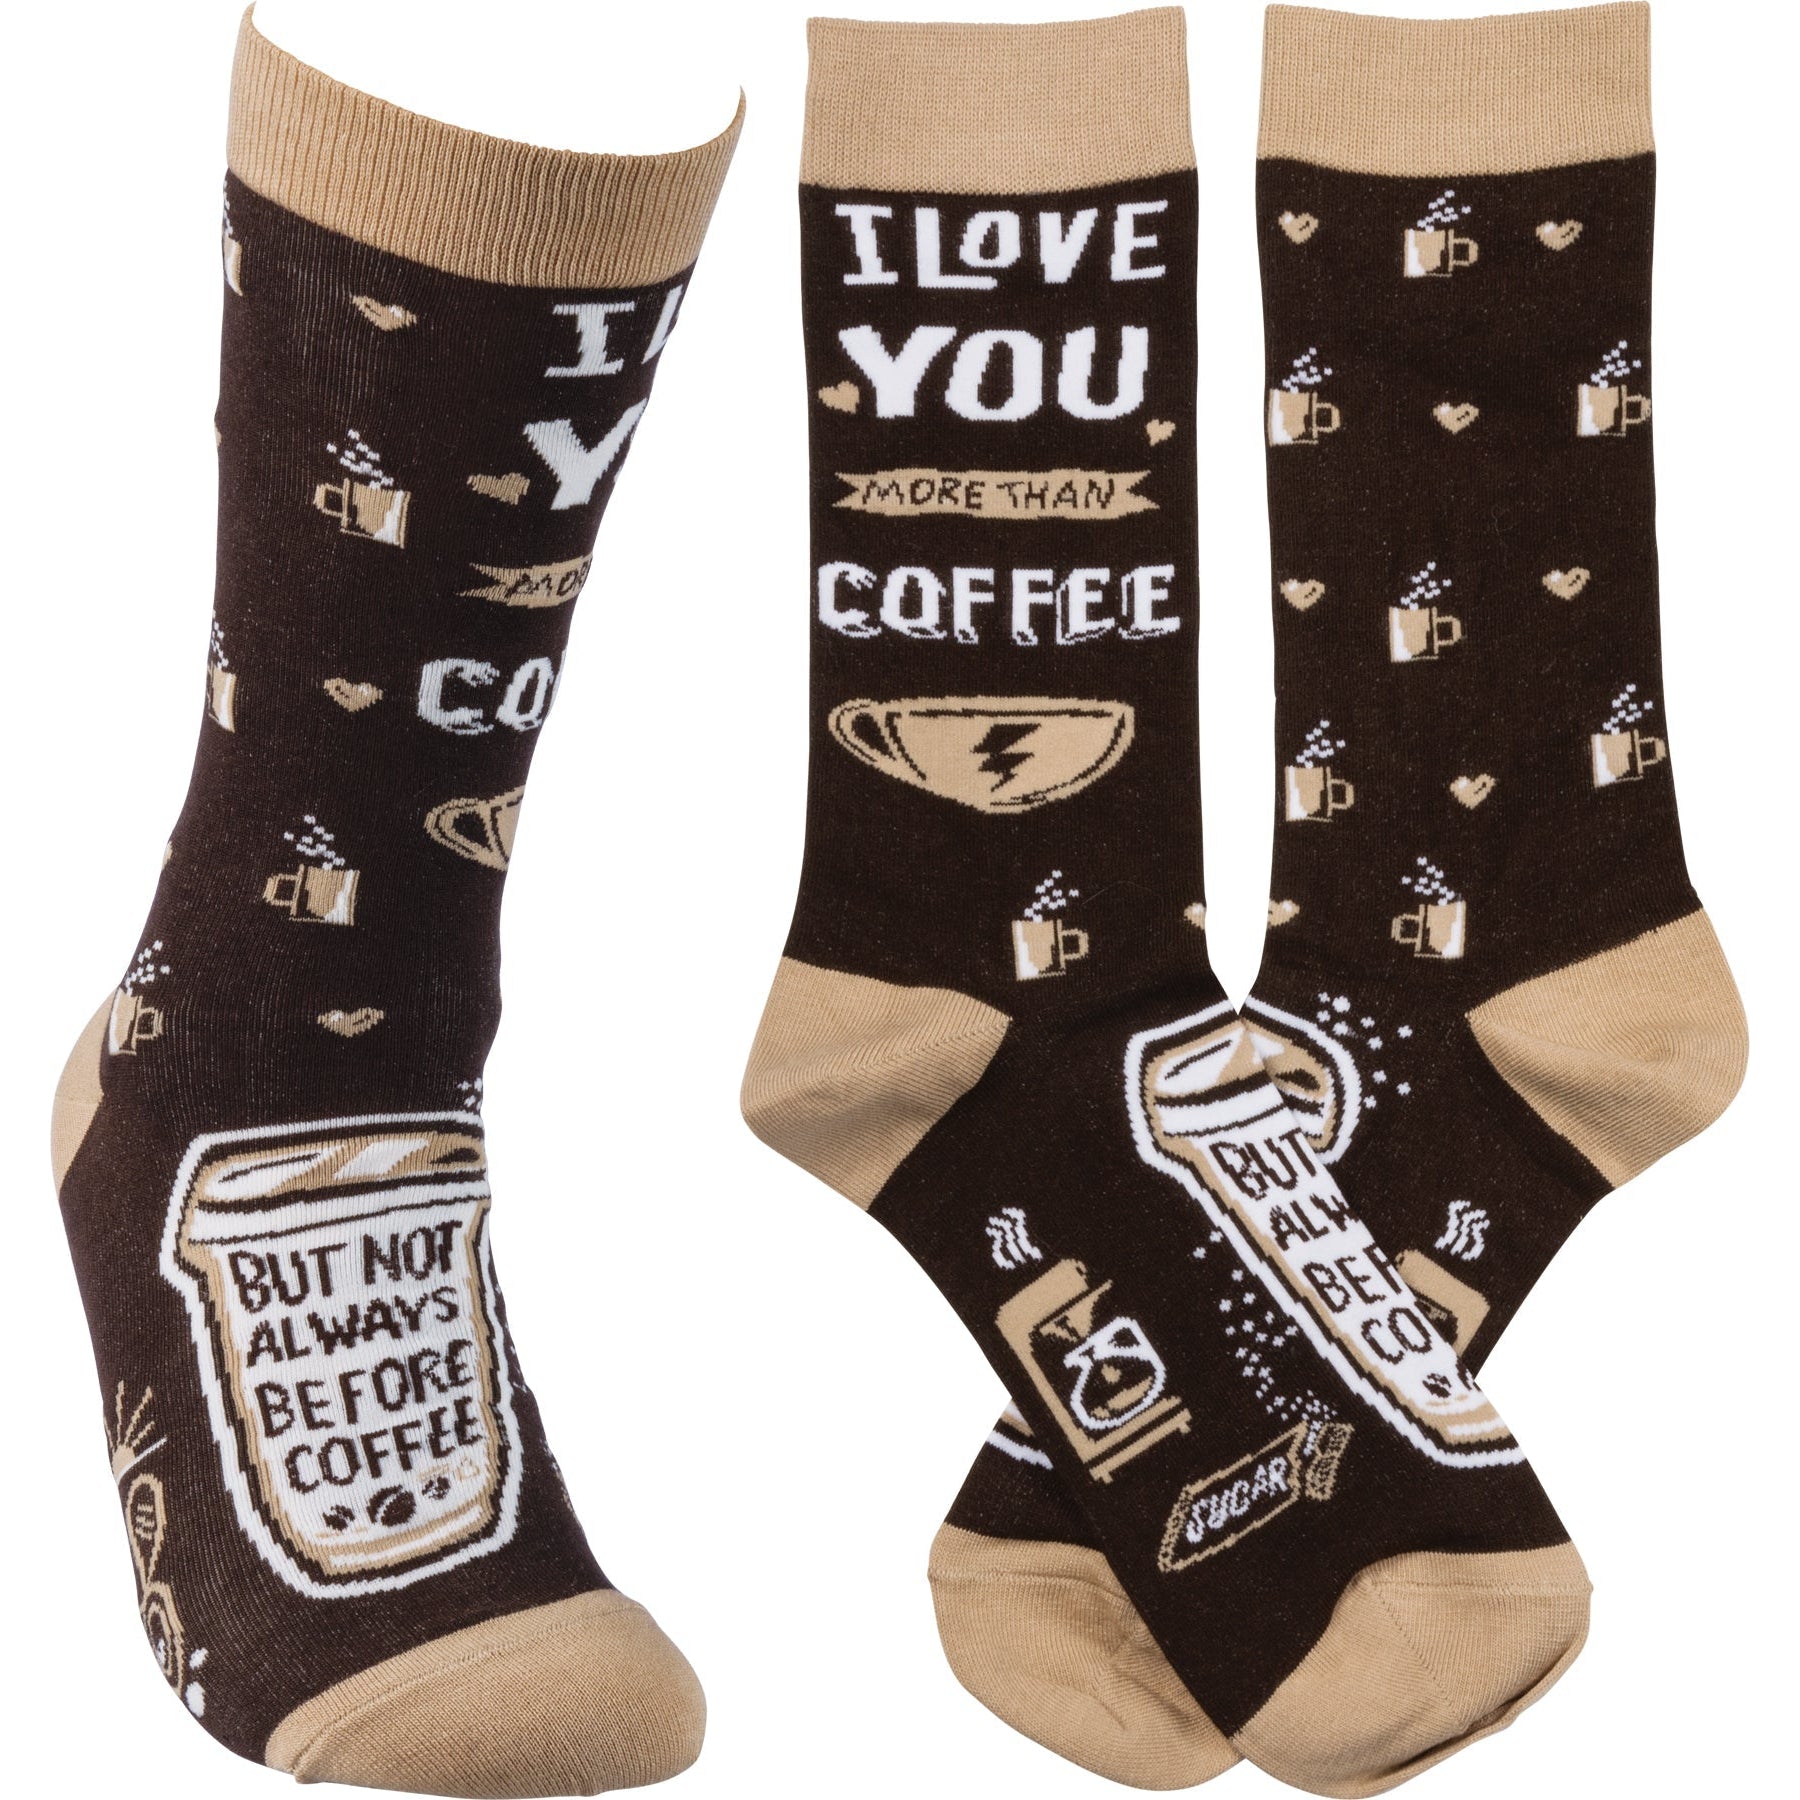 I Love You More Than Coffee But Not Always Before Coffee Funny Novelty Socks